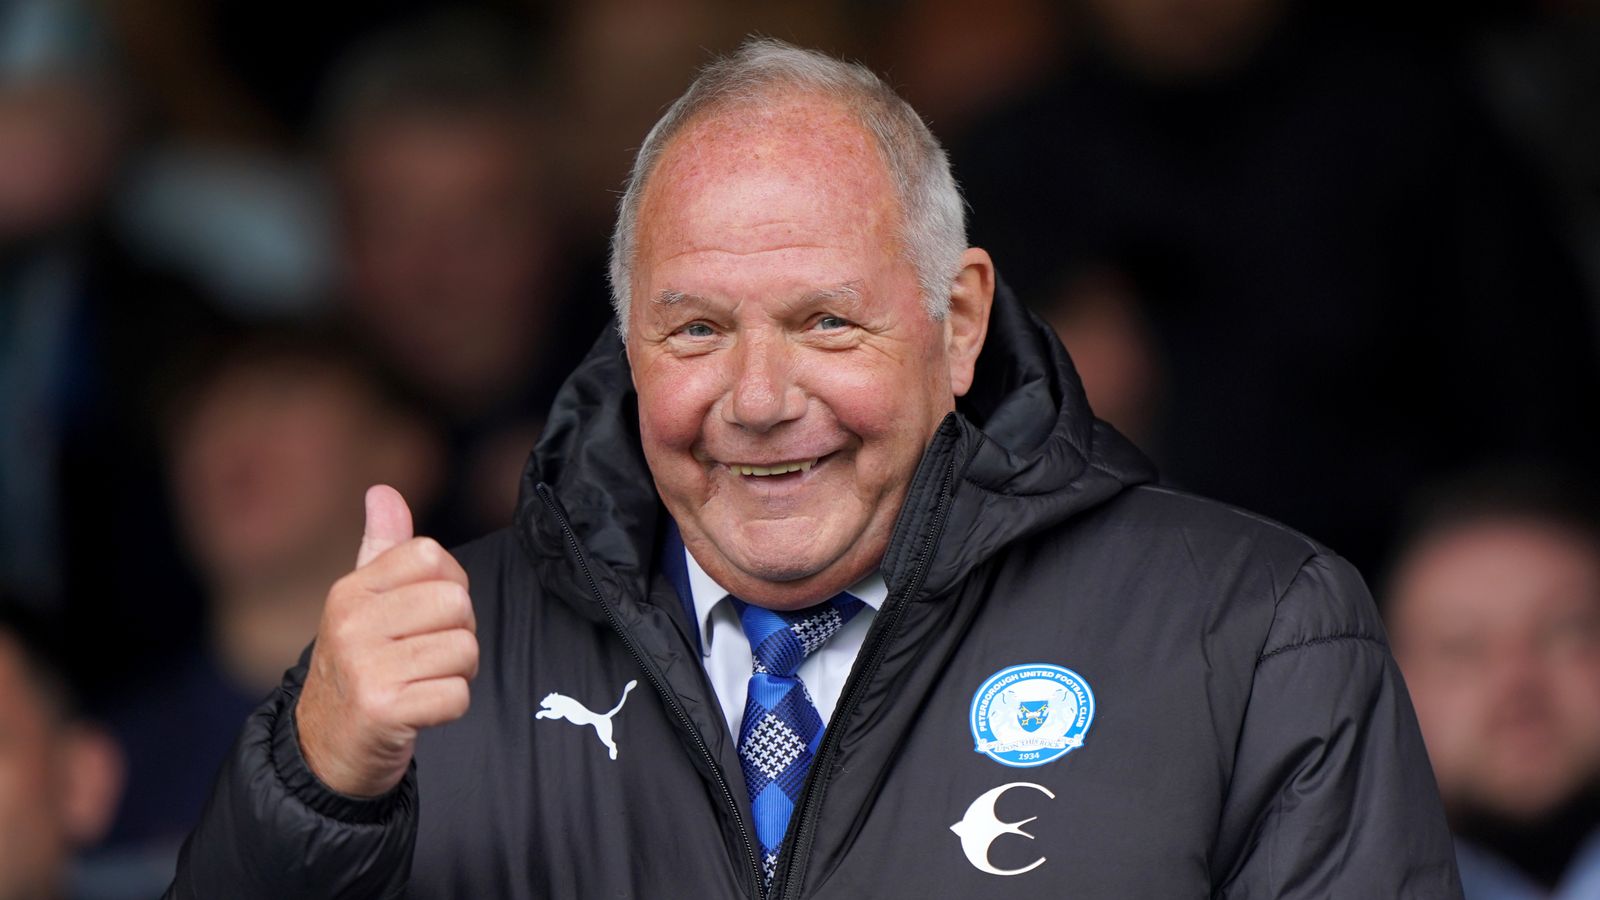 Peterborough's Barry Fry on Paul Gascoigne, George Best and more from more than six decades in the game